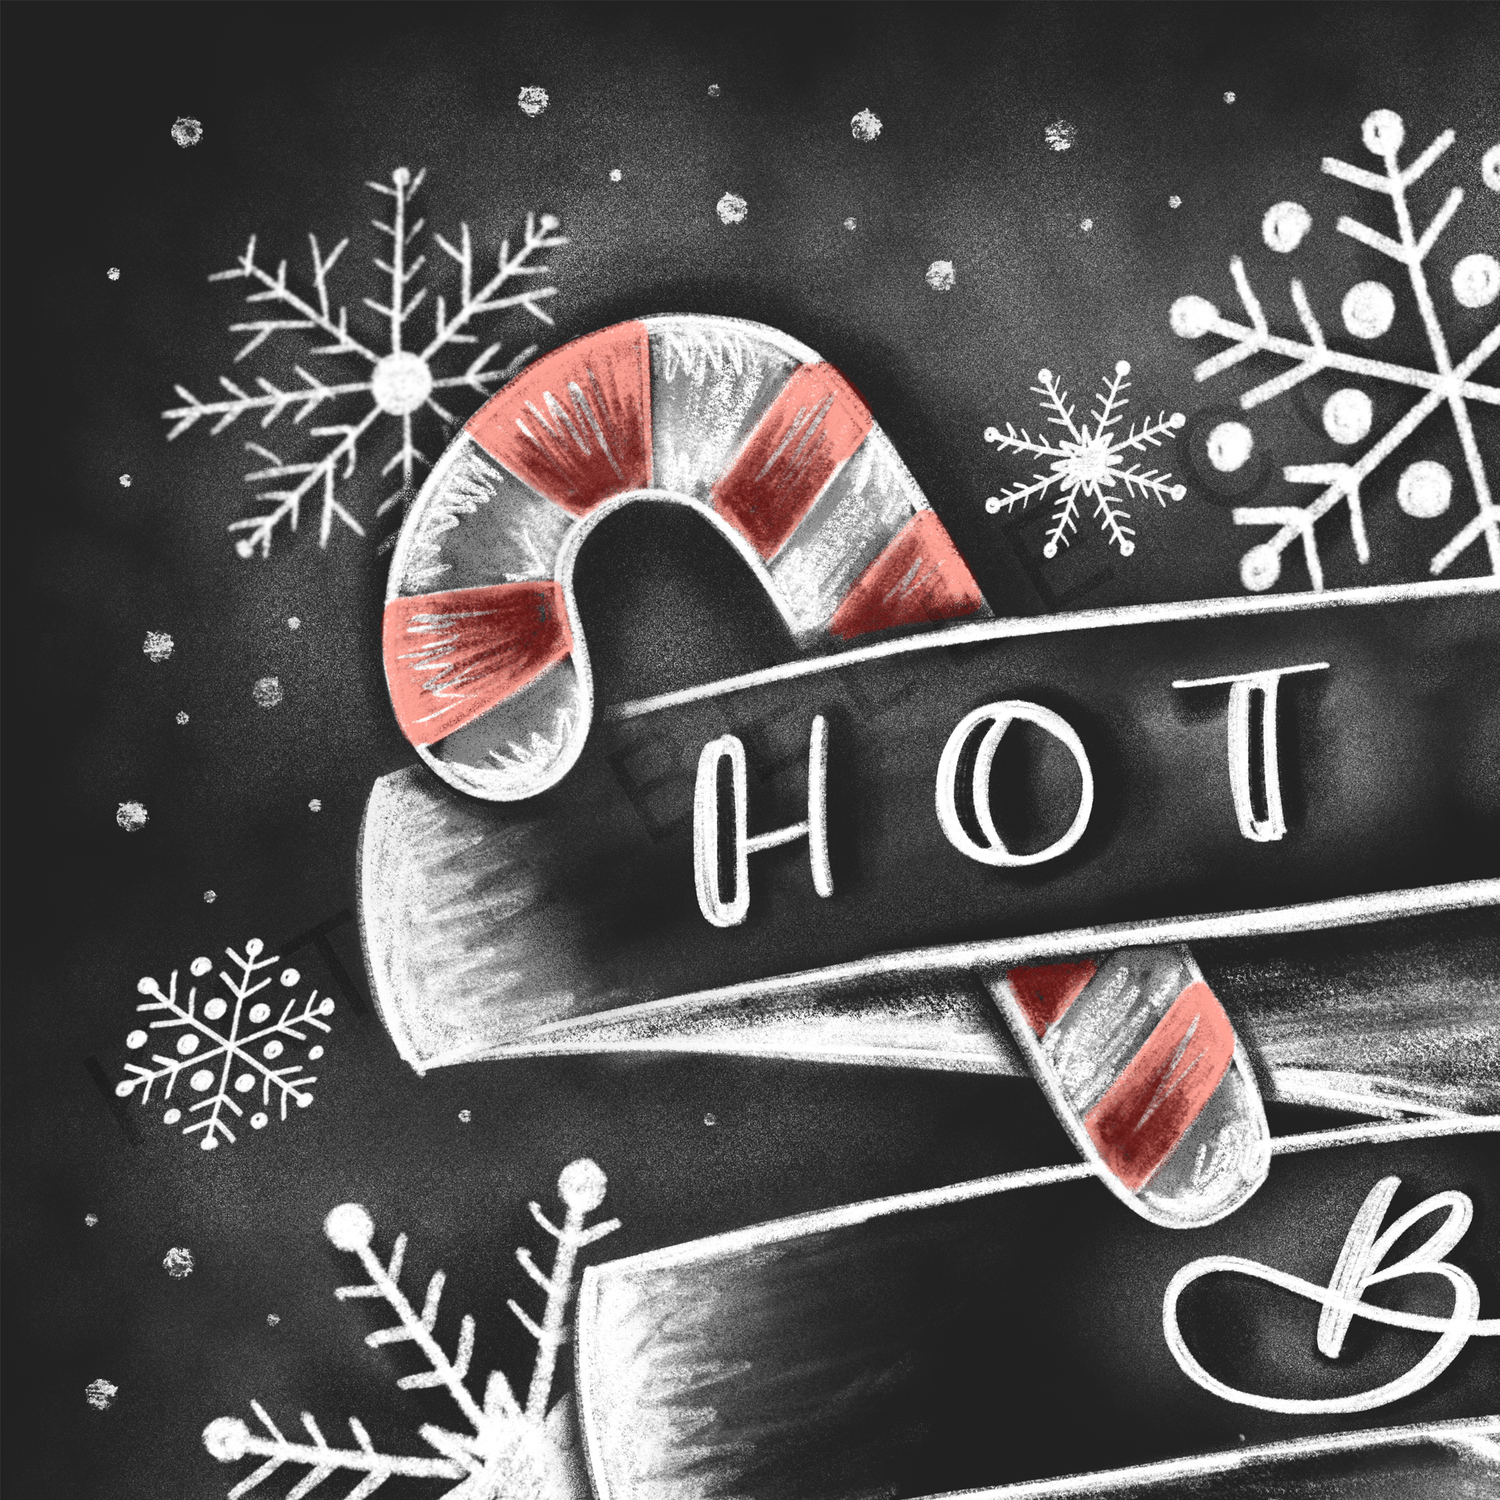 hot cocoa bar. hot cocoa. favorite festive goodies. Red holiday mug. snowflakes. Candy canes. marshmallows. best seller. cup of cheer. holidays. christmas. Experience the holidays like never before with our Hot Cocoa Bar Chalkboard print! Perfect for a cup of cheer, it features all your favorite festive goodies - from red holiday mugs and snowflakes to candy canes and marshmallows. Get ready for your best Christmas yet with our best seller! Katie Belle Co.